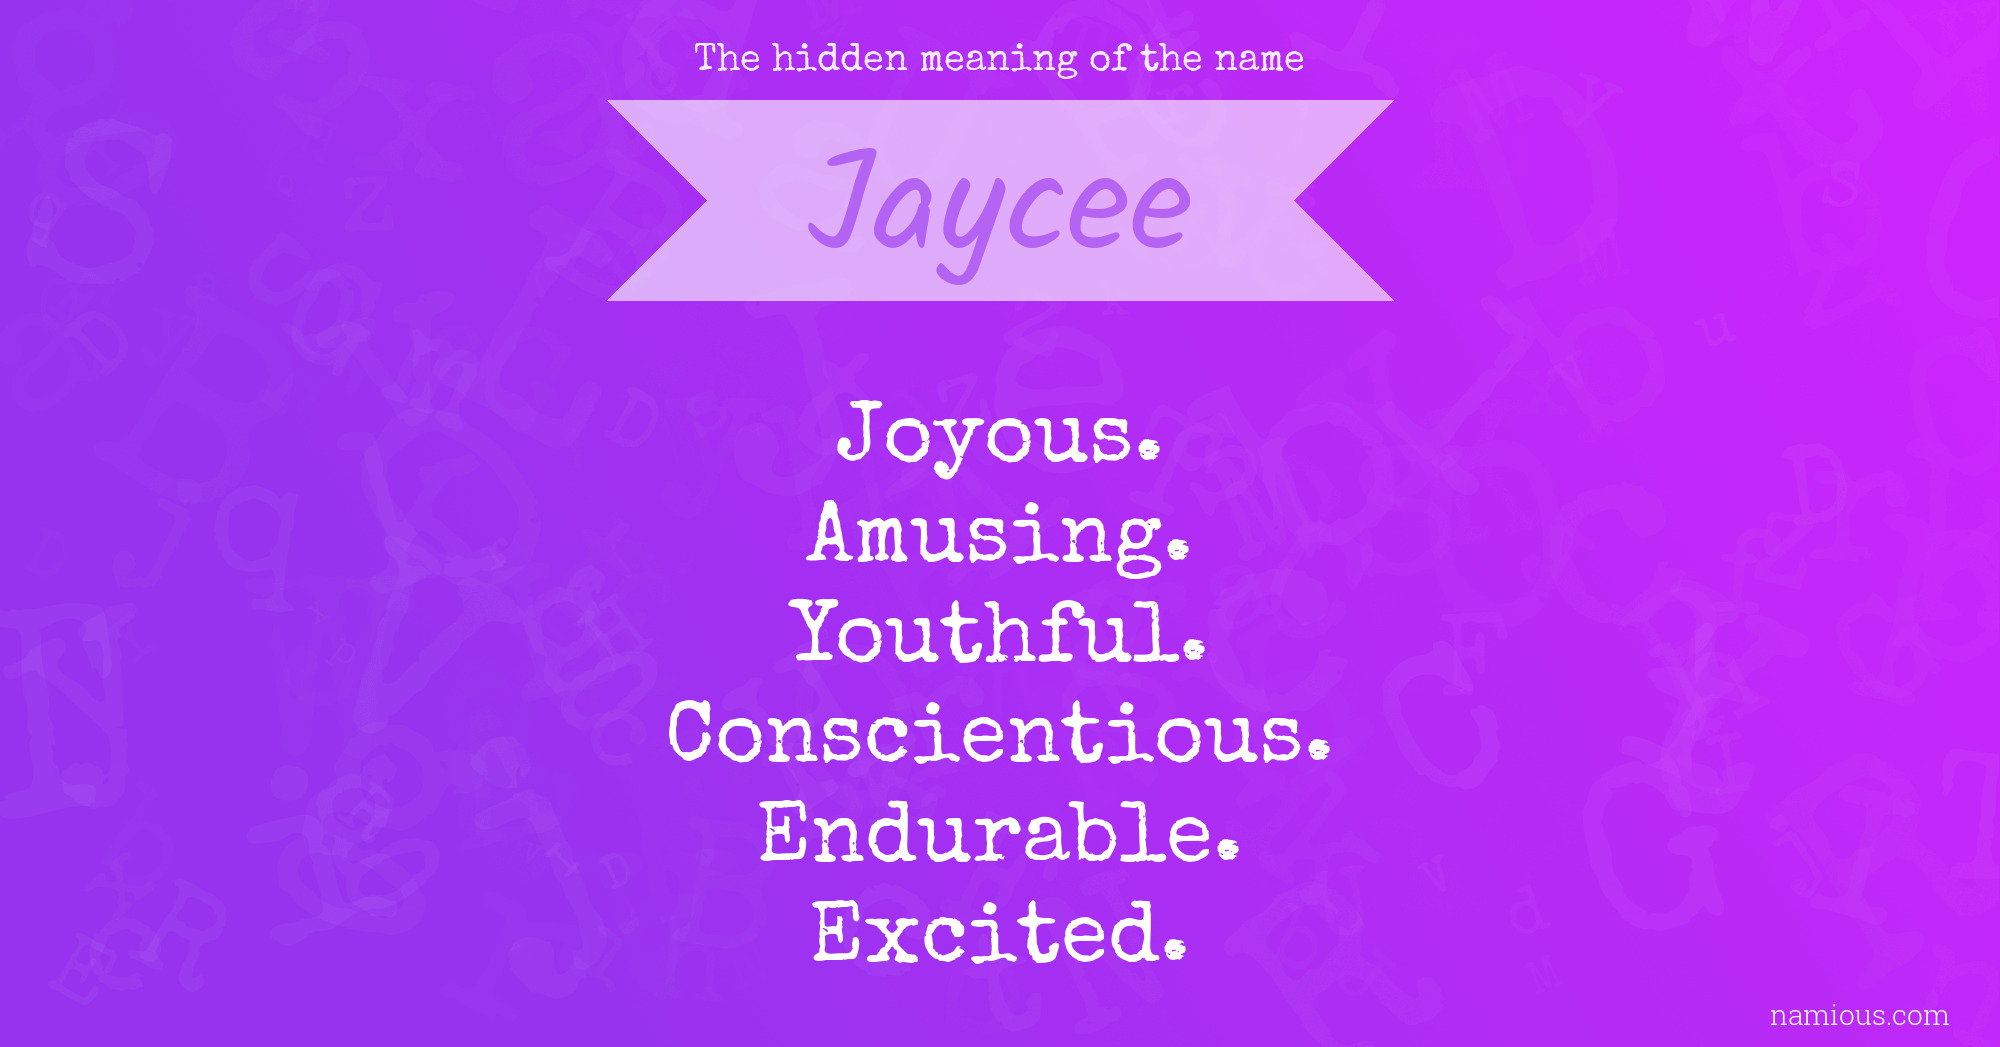 The hidden meaning of the name Jaycee